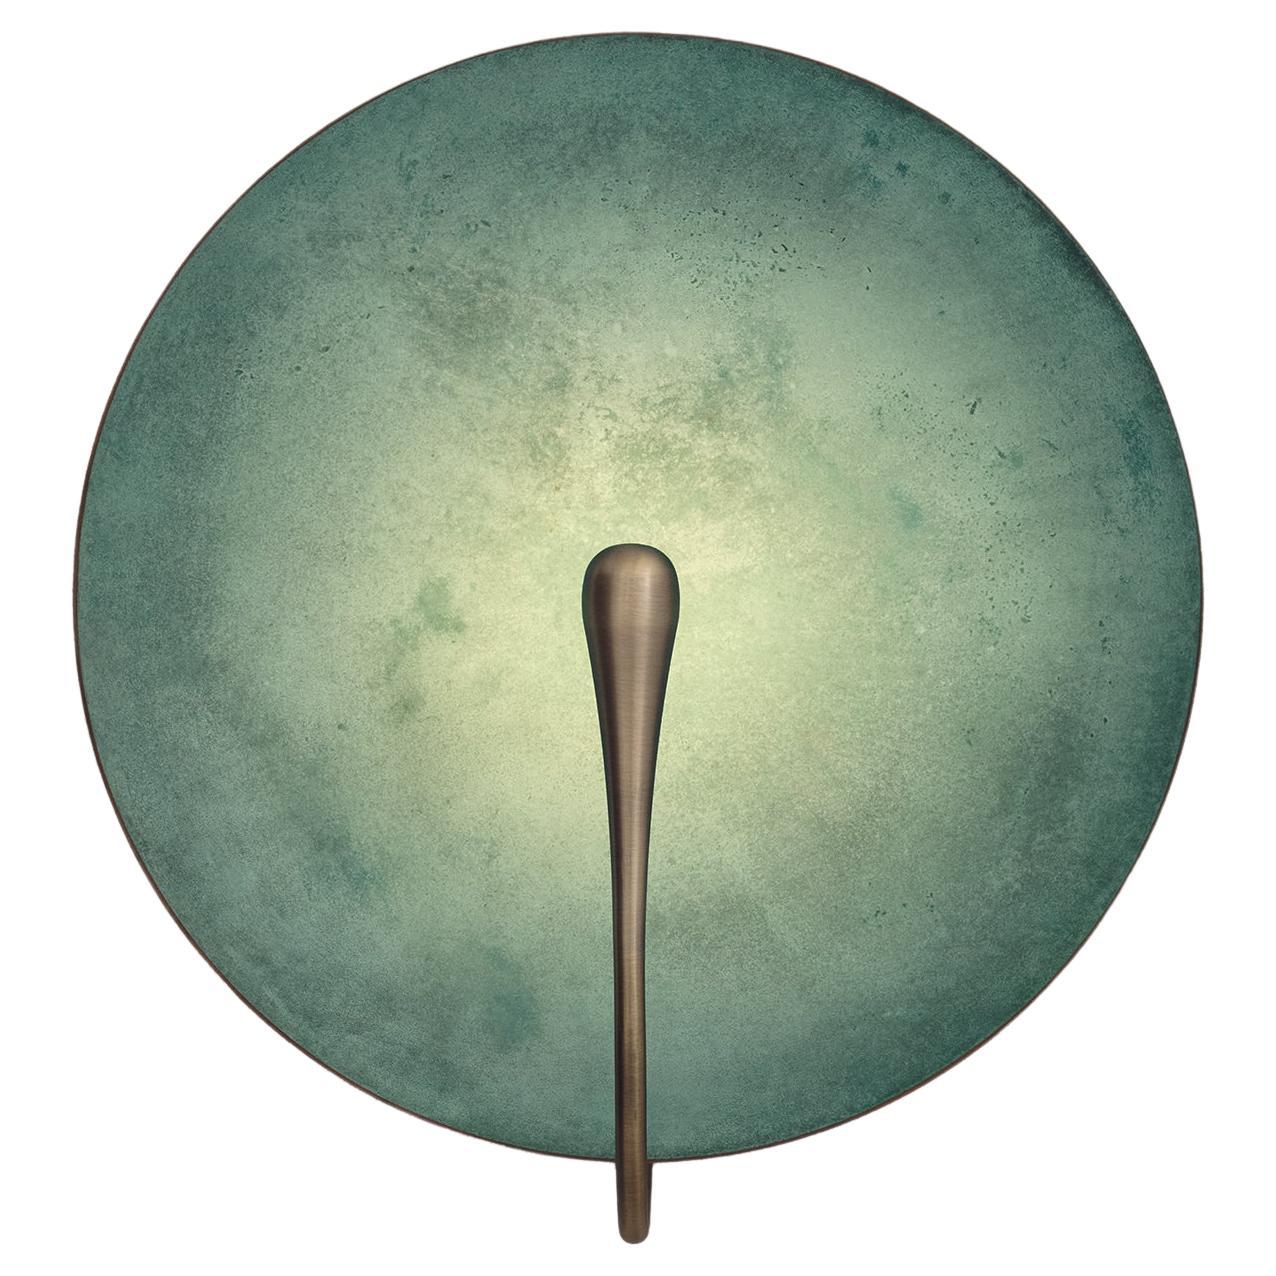 Inspired by the beautiful textures of nature, a verdigris patina is applied on a hand-spun brass plate to create this unique finish. Please note that with each process being slightly random, every result is variant.

Softly illuminated with